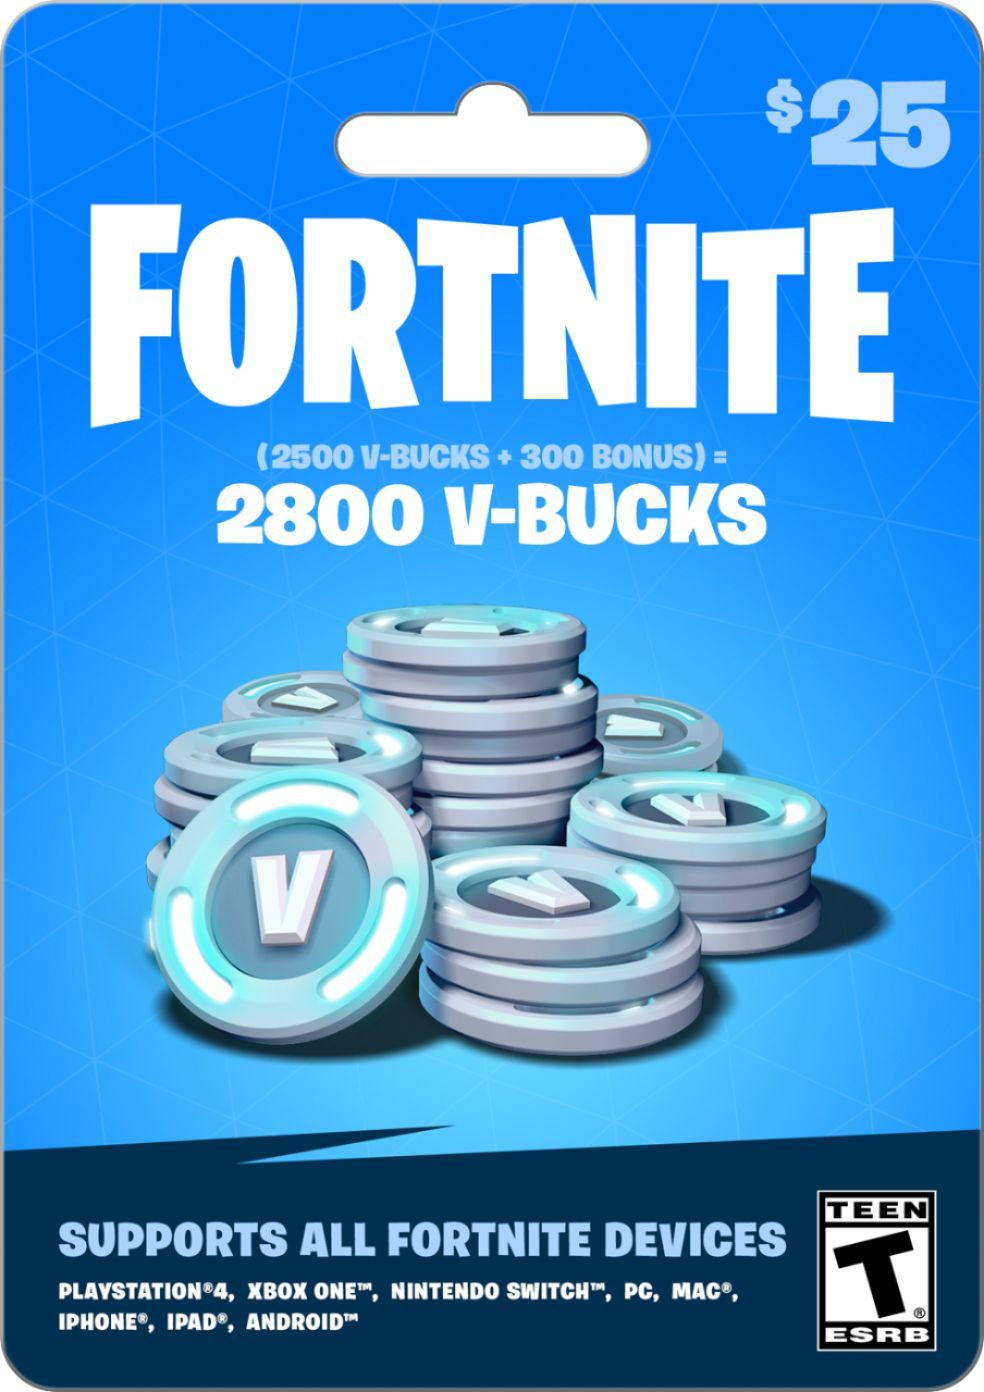 $25 Fortnite In Game Currency Card GEARBOX FORTNITE V BUCKS $25 Buy. In Game Currency, Ps4 Gift Card, Gift Card Generator